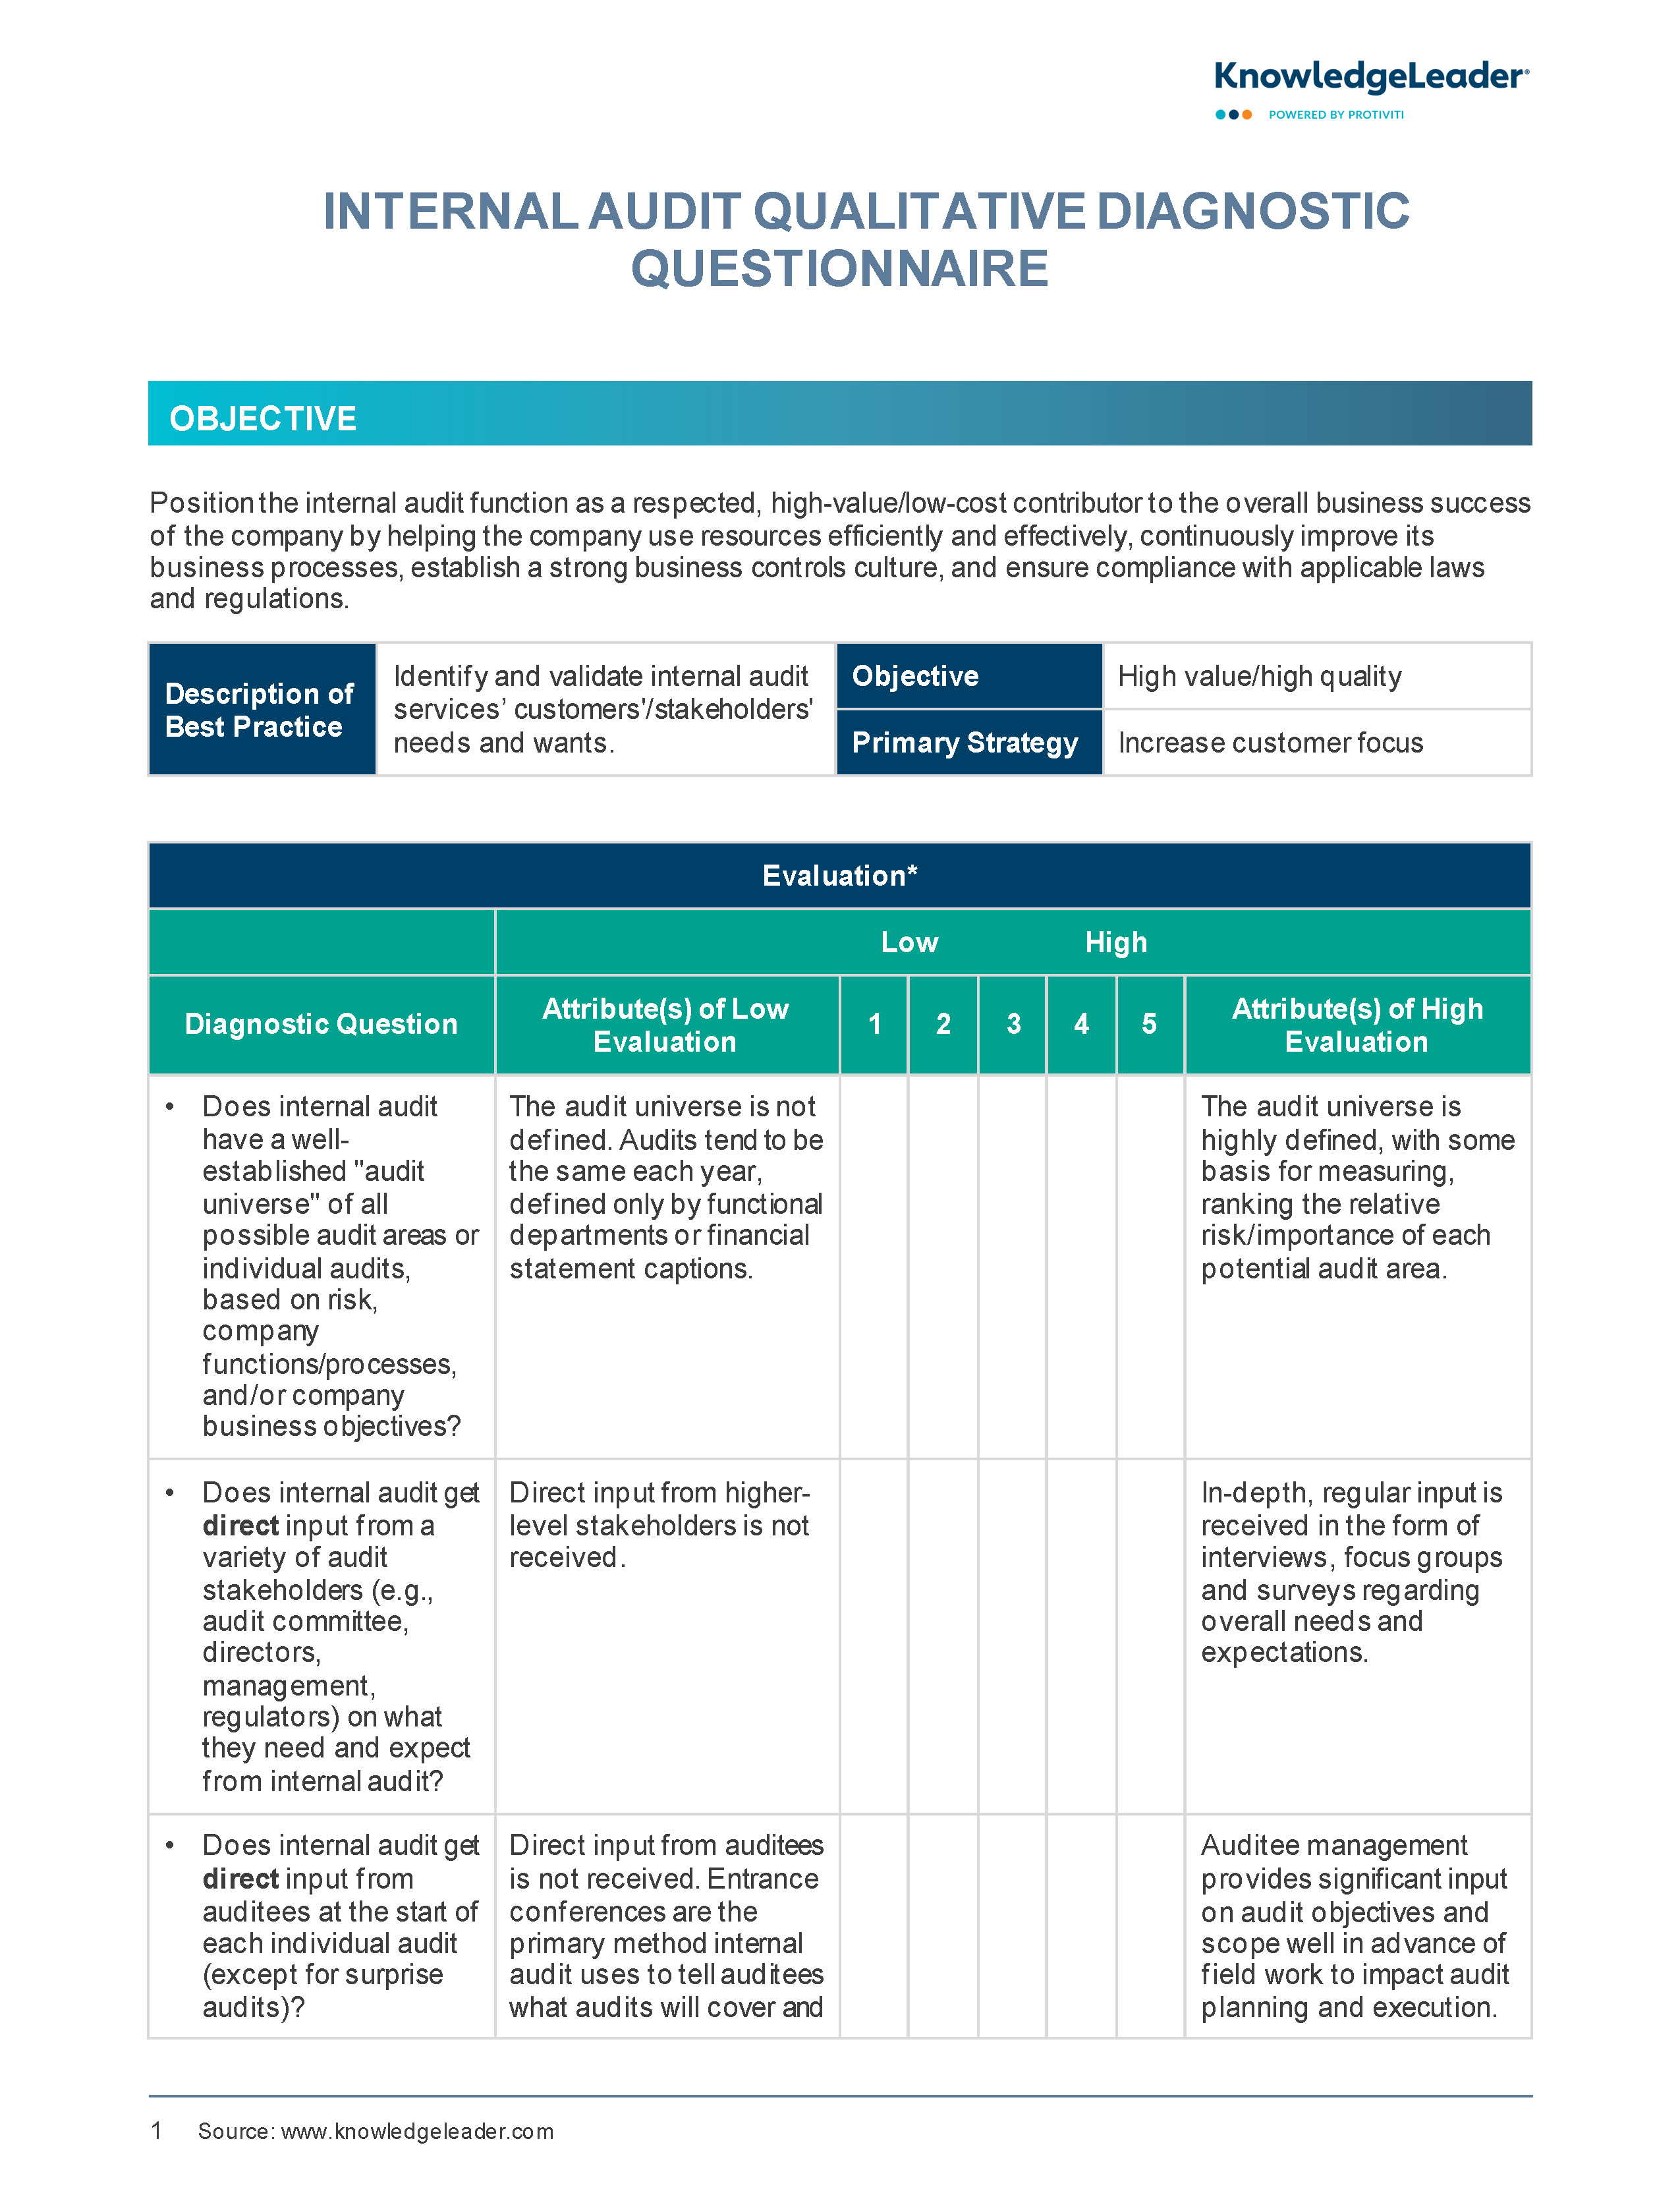 Screenshot of the first page of Internal Audit Qualitative Diagnostic Questionnaire